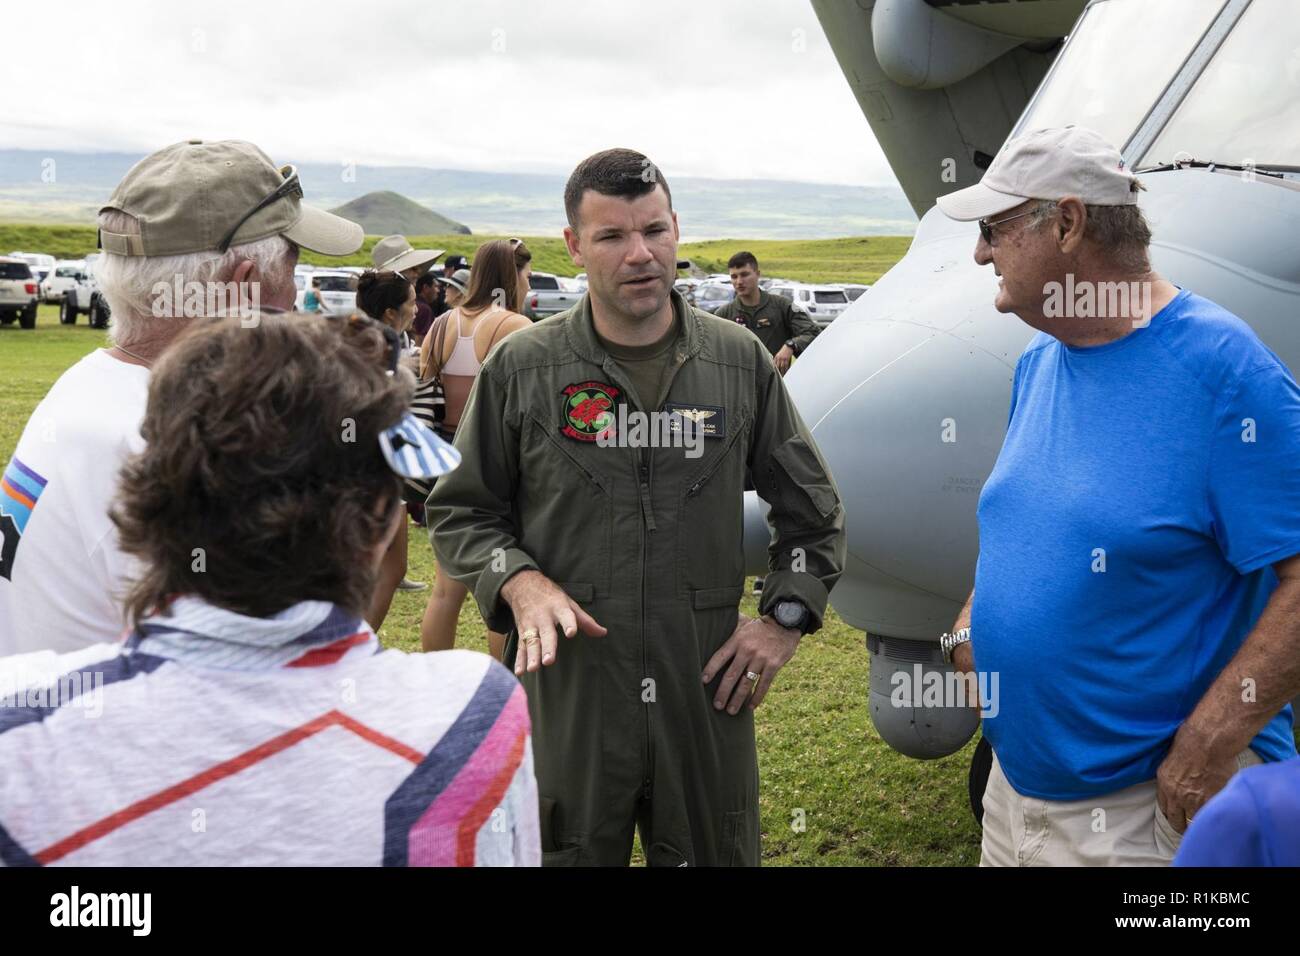 U.S. Marine Corps Maj. Christopher Ulcak, an aircraft commander with Marine Medium Tiltrotor Squadron (VMM) 363, meets with local community members at the Waimea District Park to showcase an Osprey aircraft, Oct. 13, 2018. VMM-363 flew one of their aircraft from Marine Corps Base Hawaii on Oahu to the Waimea Fall Festival, providing a static display and subject matter experts for a first-hand experience to the festival’s attendants. The squadron arrived to Hawaii earlier this year increasing the combat capability and crisis response within the Indo-Pacific region. Stock Photo